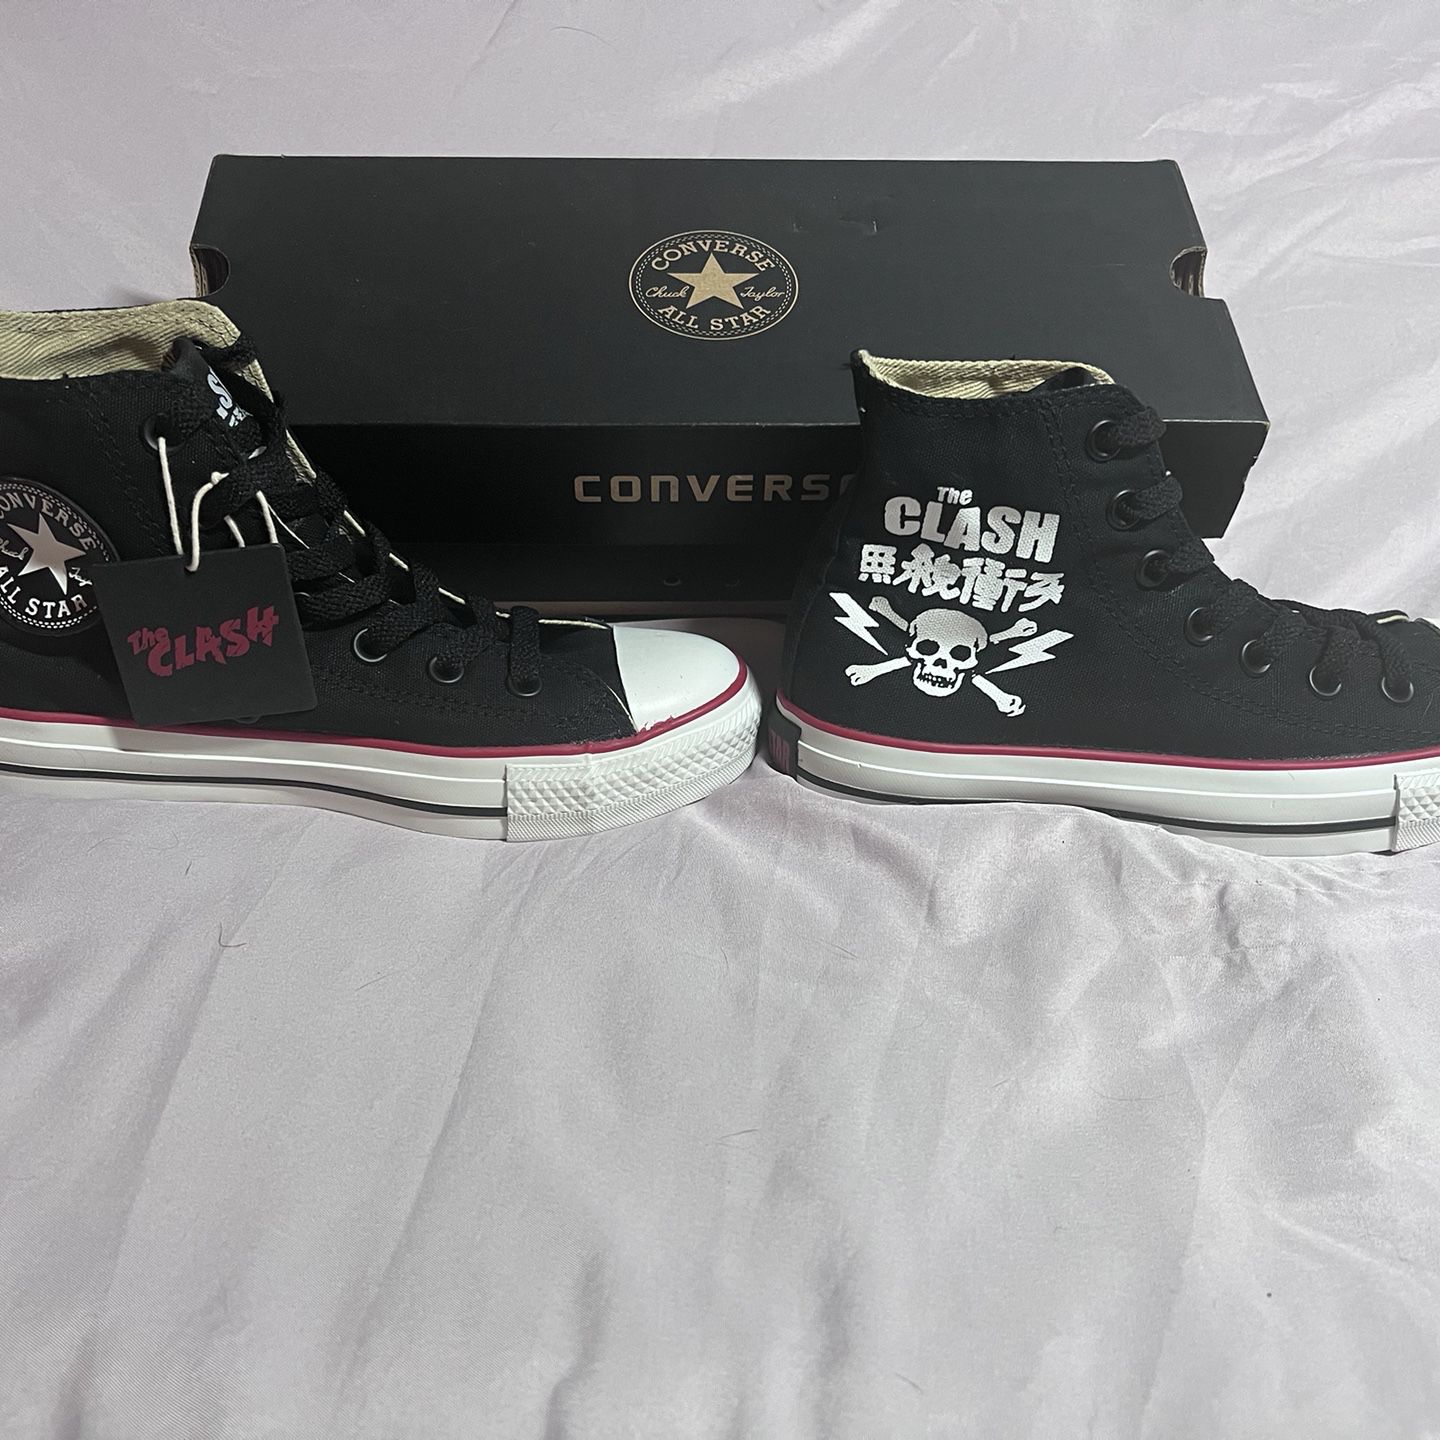 CLASH OF TITANS CONVERSE for Sale in Brooklyn, NY